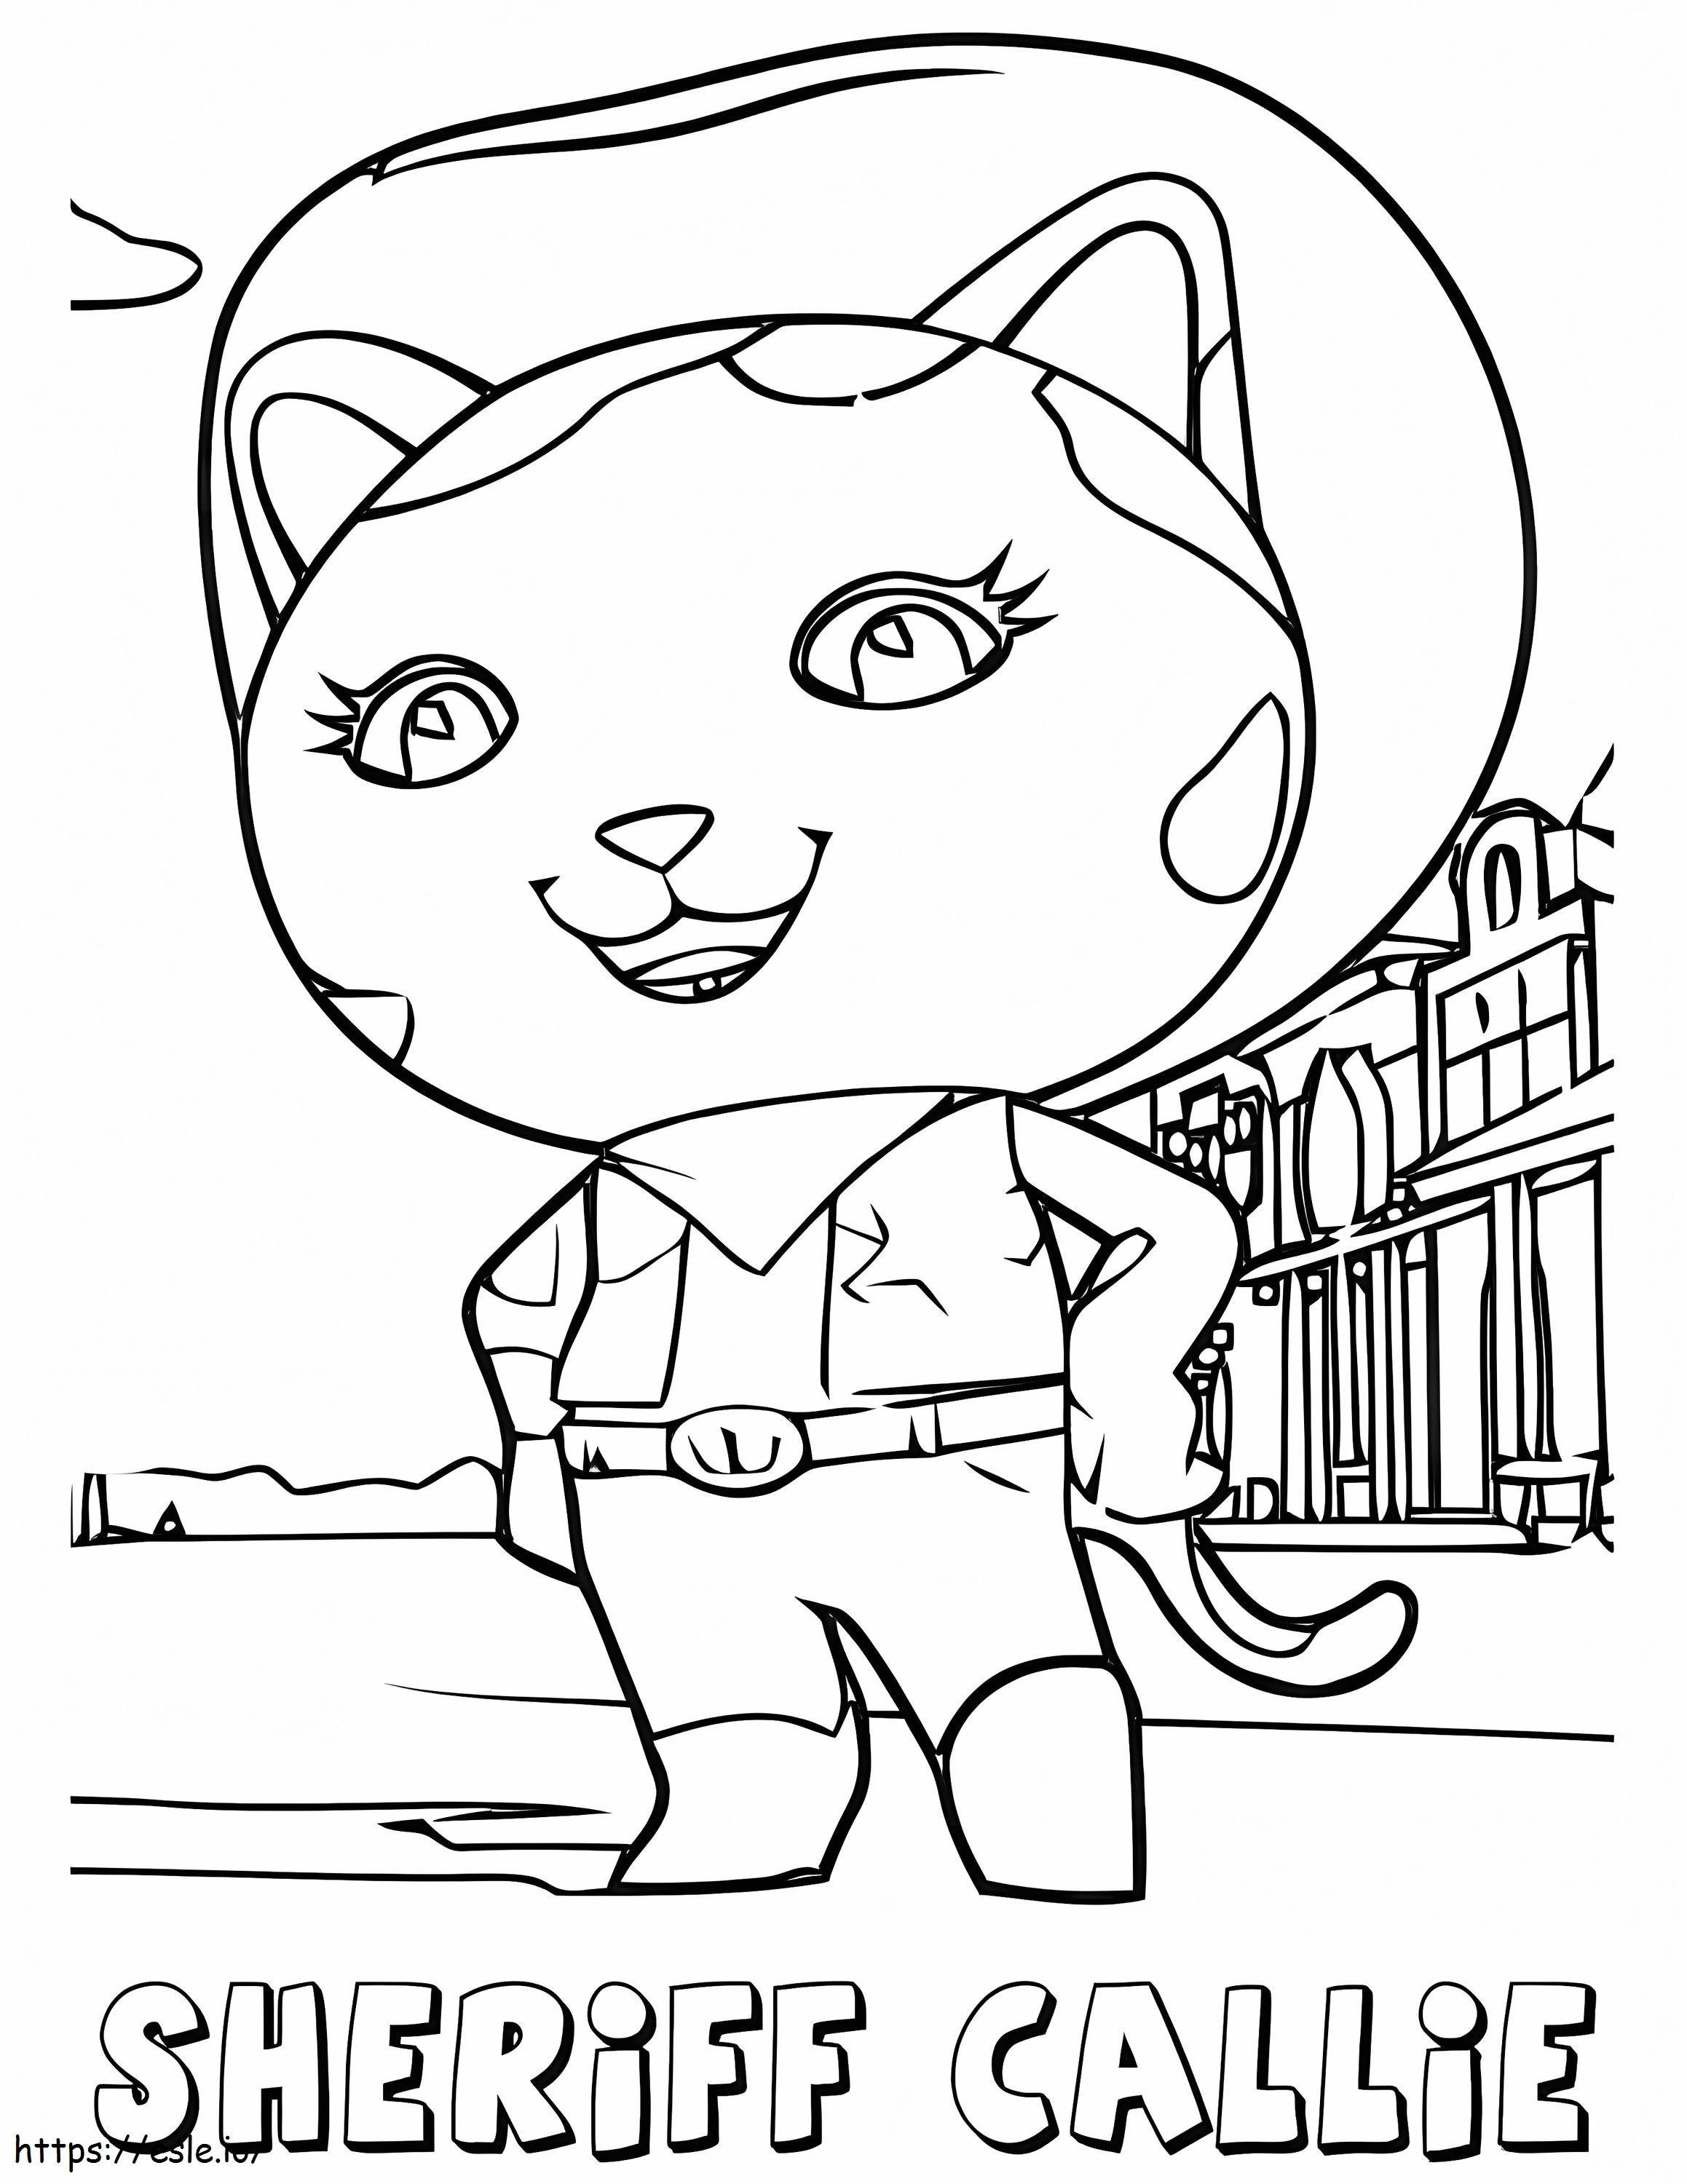 Sheriff Callie Smiling coloring page